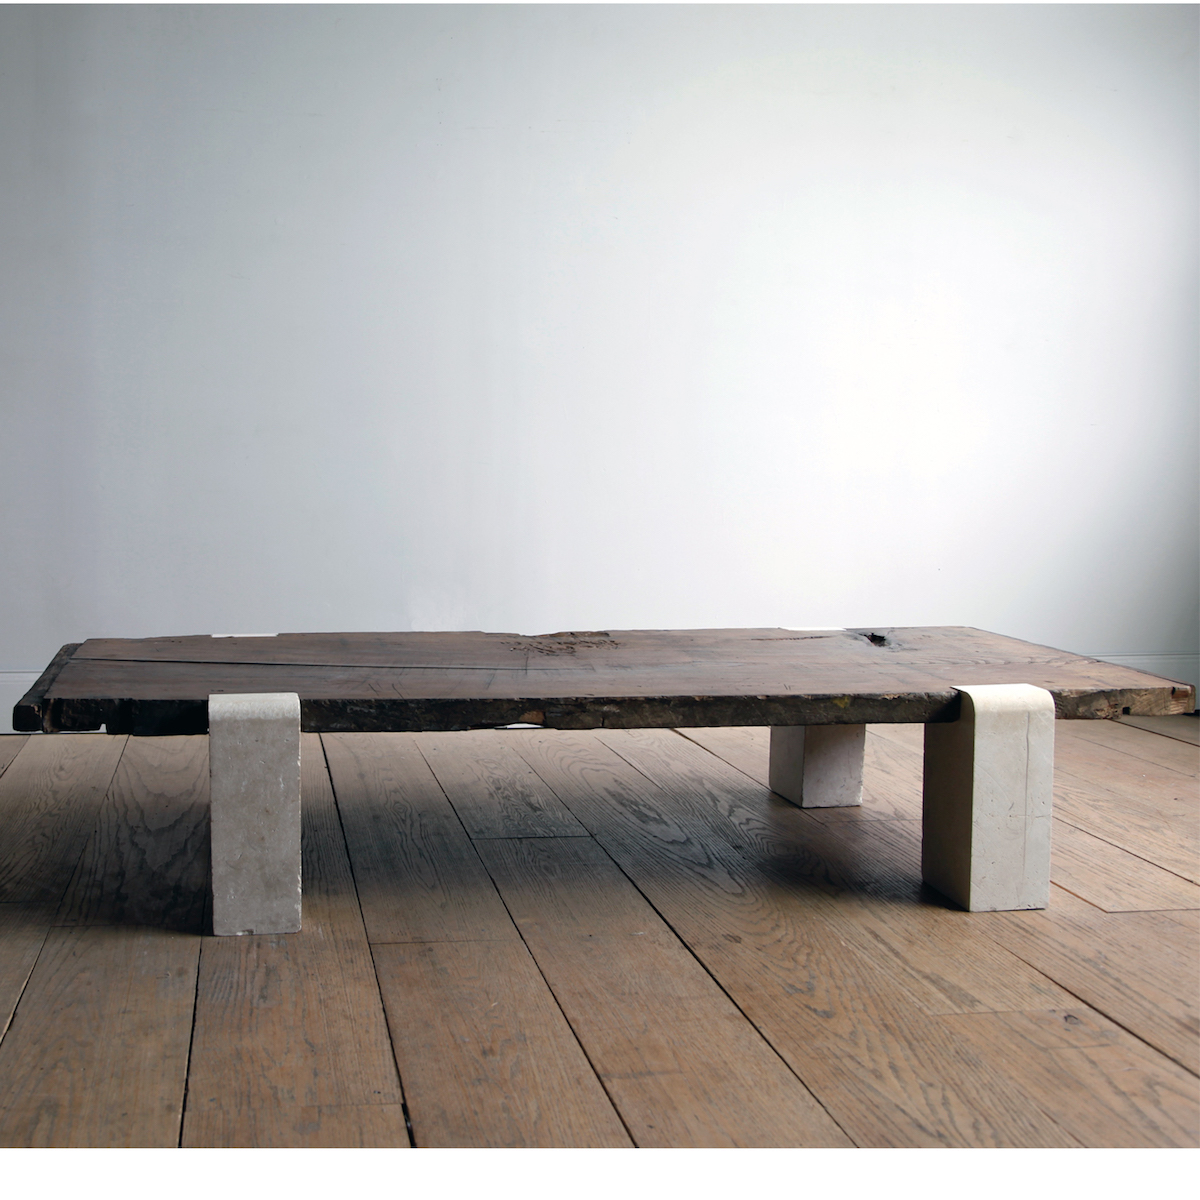 Monument Table by Lawton Mull